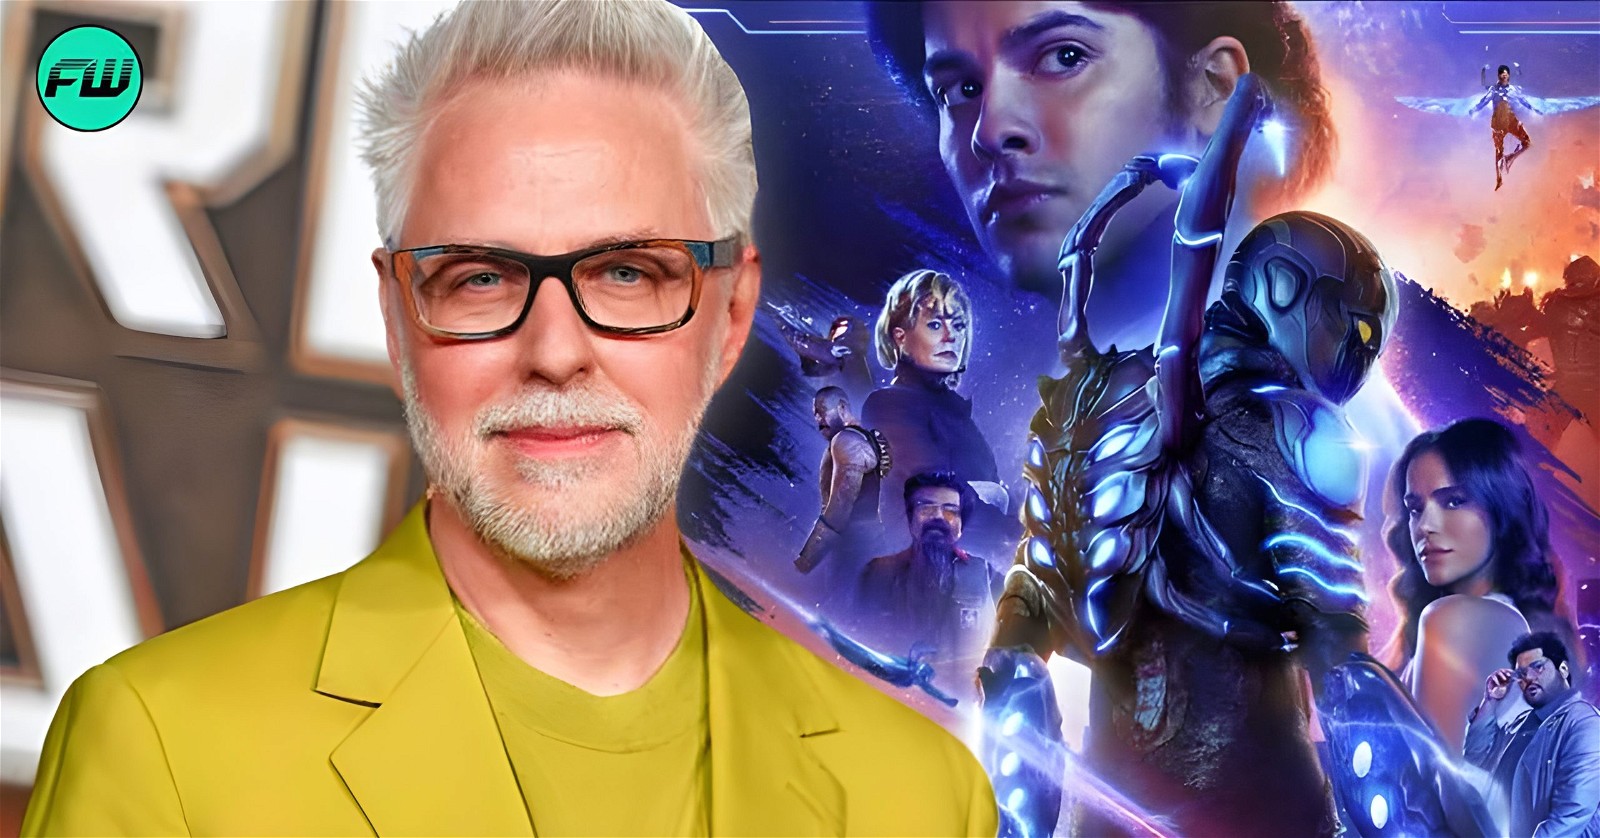 “I need the depiction to be triggering”: Blue Beetle Director Claims James Gunn’s Next DCU Film Will Pay Homage to Latin Cinema Despite Movie Tracking to Have Worst Ever Box-Office Collection